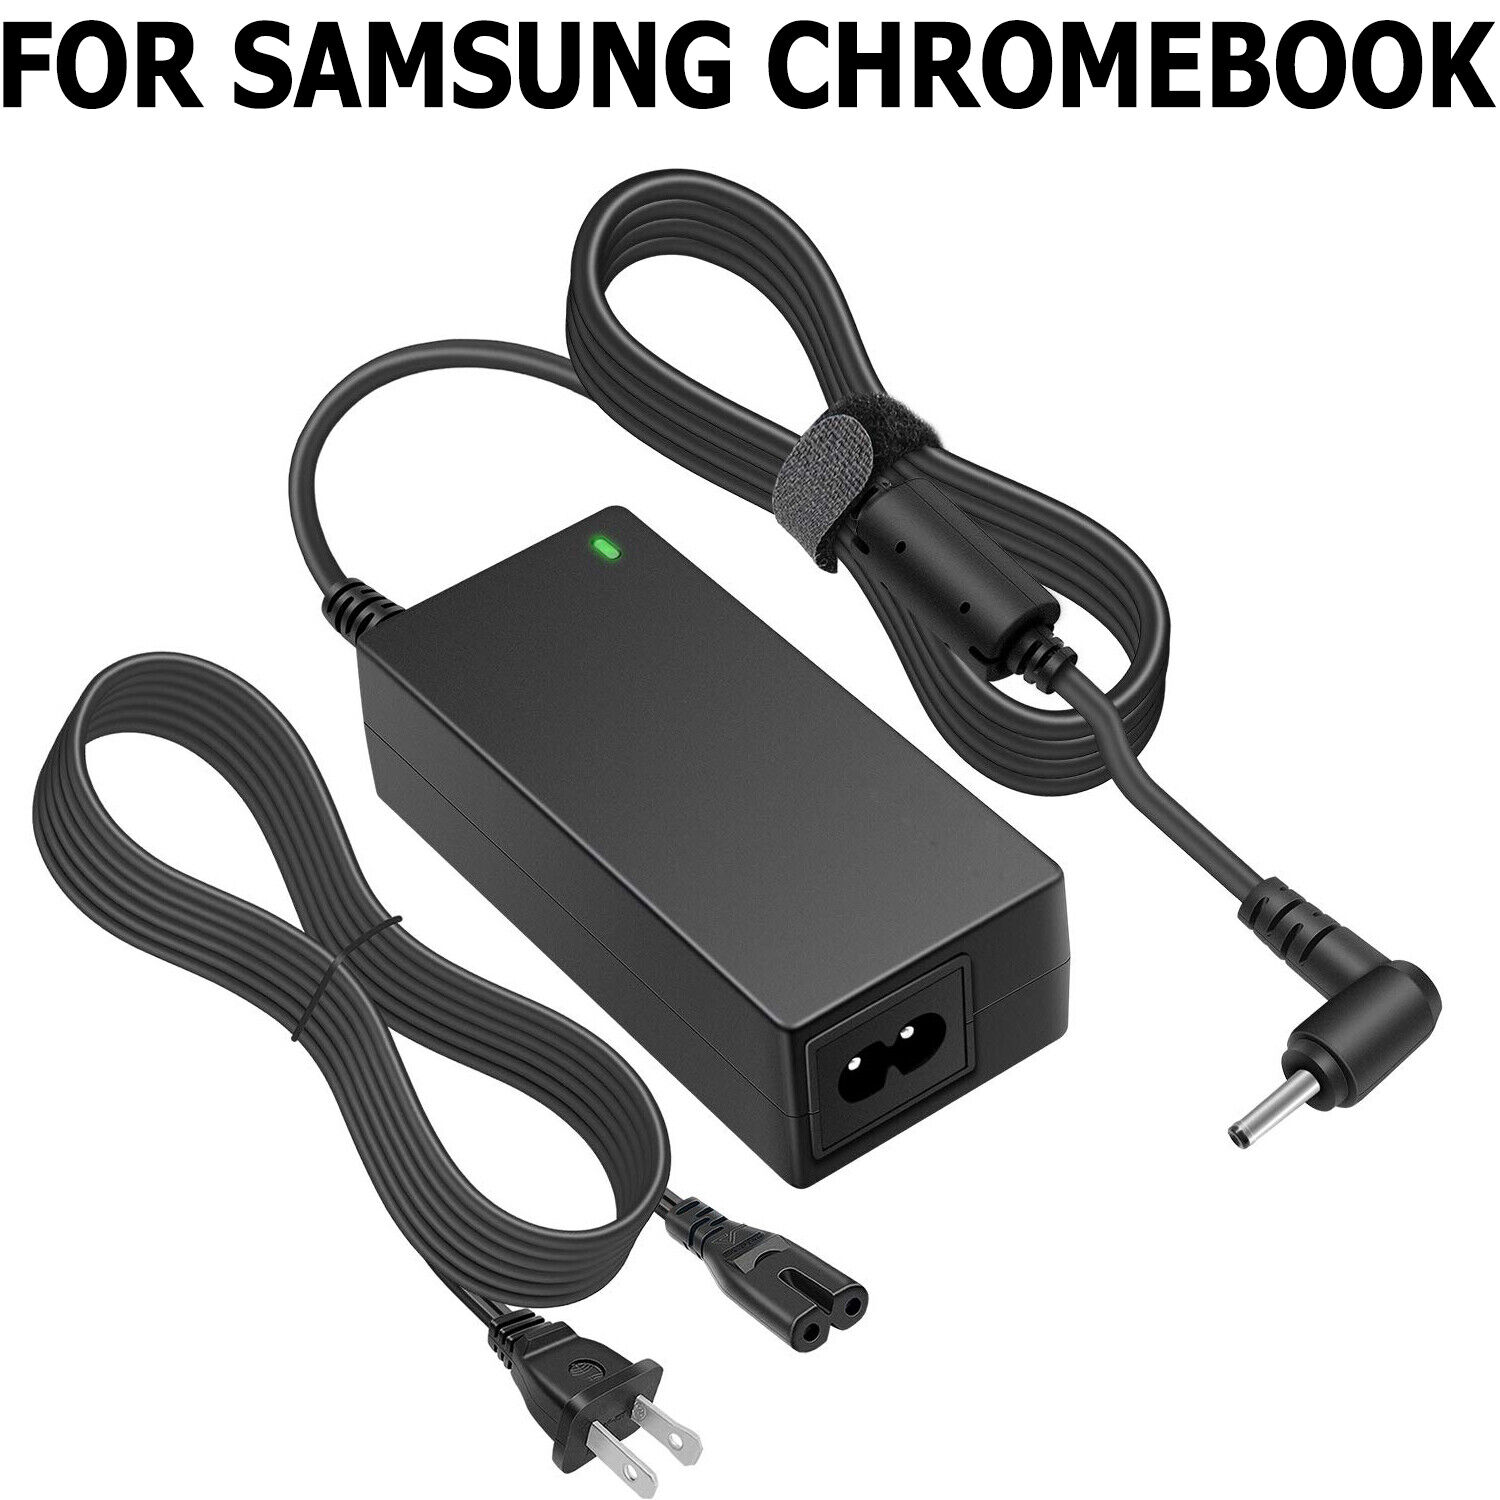 For Samsung Chromebook 3 2 PA-1250-98 XE500C13 12V 2.2A 26W AC Power Charger